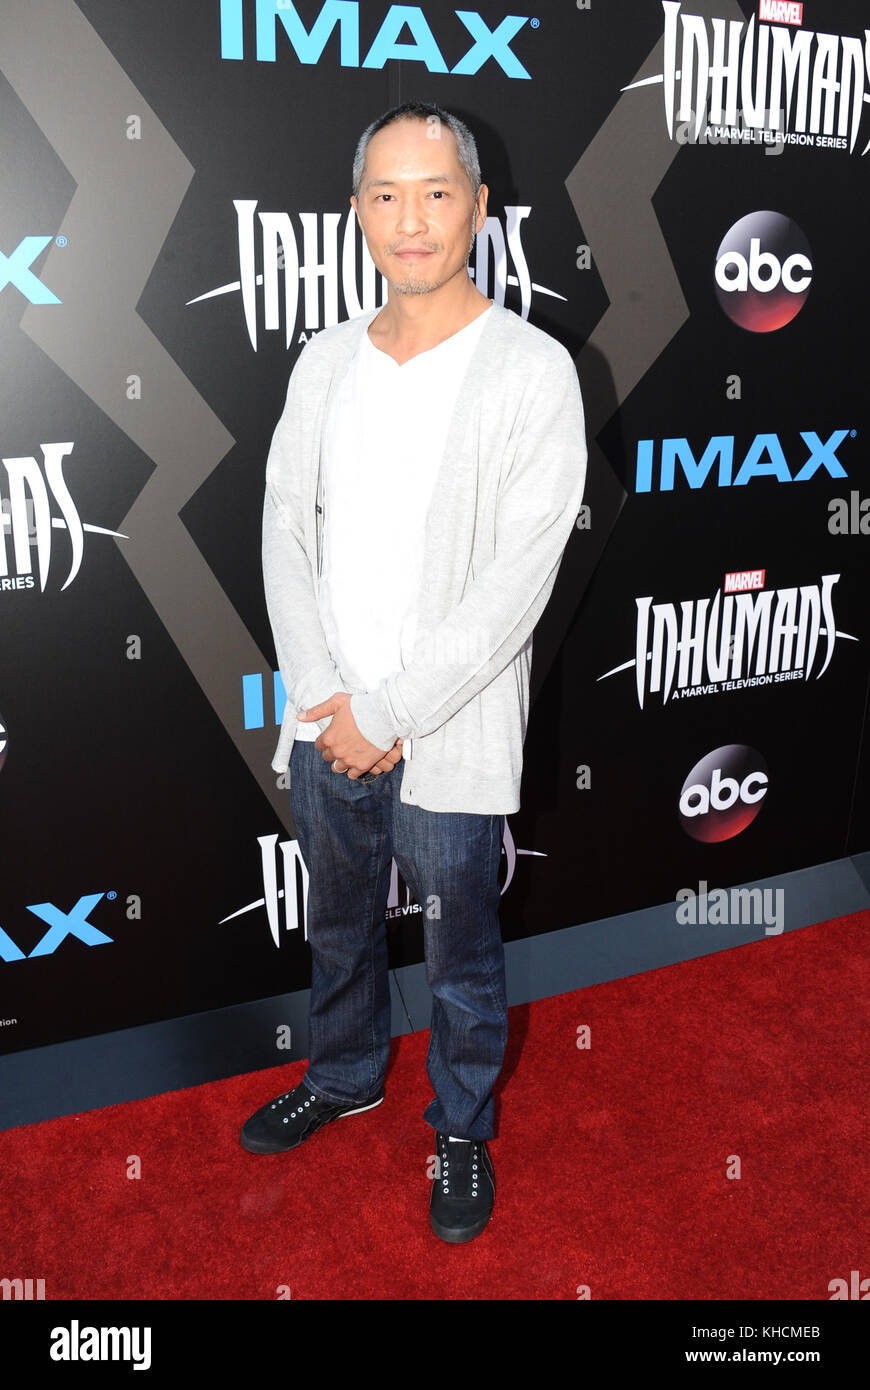 UNIVERSAL CITY, CA - AUGUST 28: Ken Leung attends the world premiere of 'Inhumans' at Universal CityWalk on August 28, 2017 in Universal City, California  People:  Ken Leung  Transmission Ref:  MNC76 Stock Photo